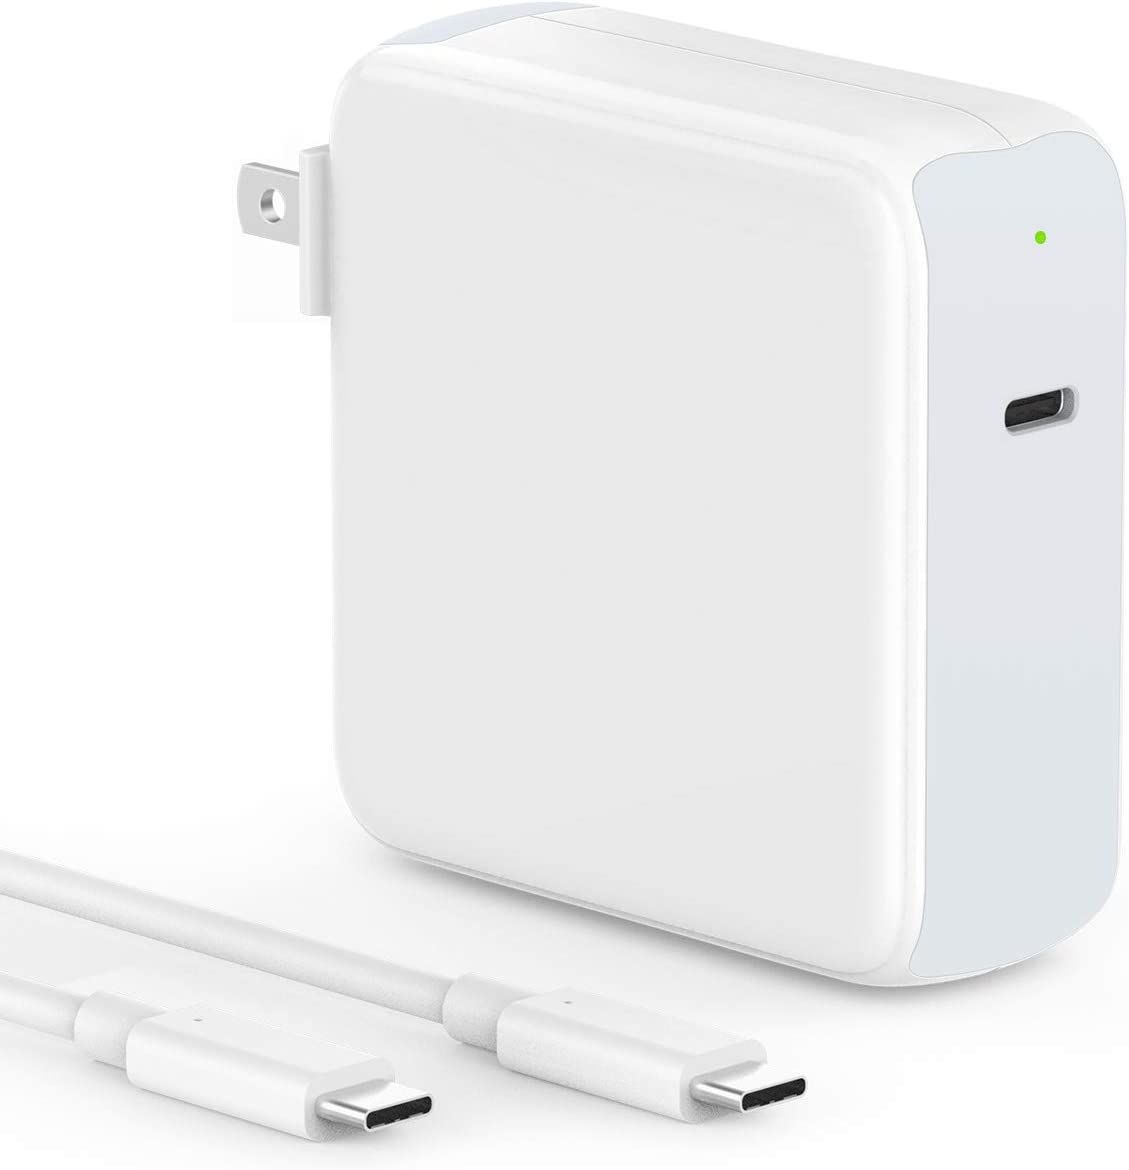 This fast charger supports up to 96W of output and comes with a USB C to USB C cable.